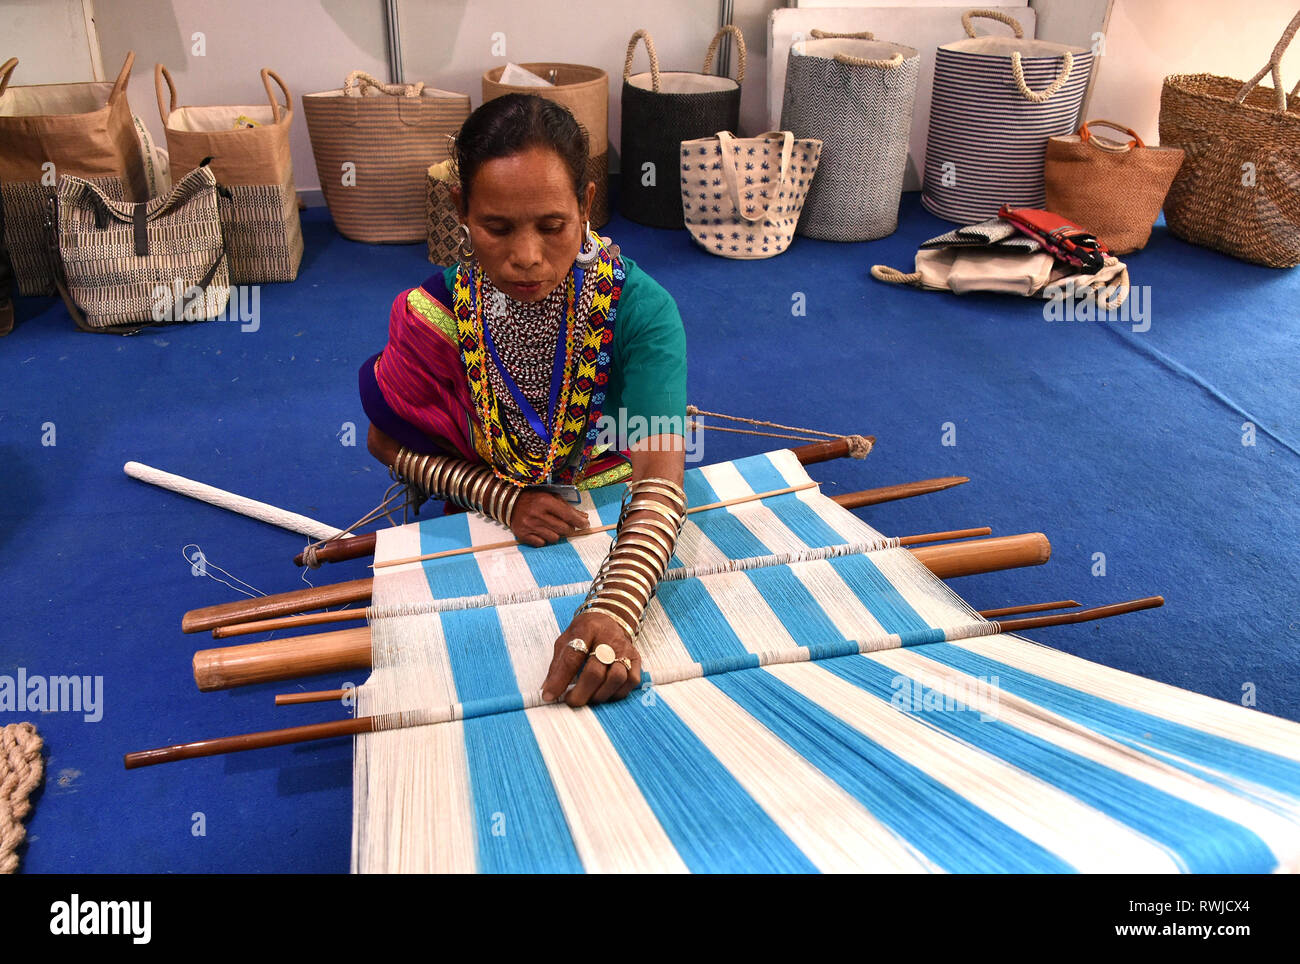 Dhaka. 6th Mar, 2019. A woman makes jute products during a jute fair in Dhaka, Bangladesh, on March 6, 2019. The Bangladeshi government on Wednesday observed the National Jute Day for the third consecutive year to boost domestic use of the golden fiber. Credit: Xinhua/Alamy Live News Stock Photo